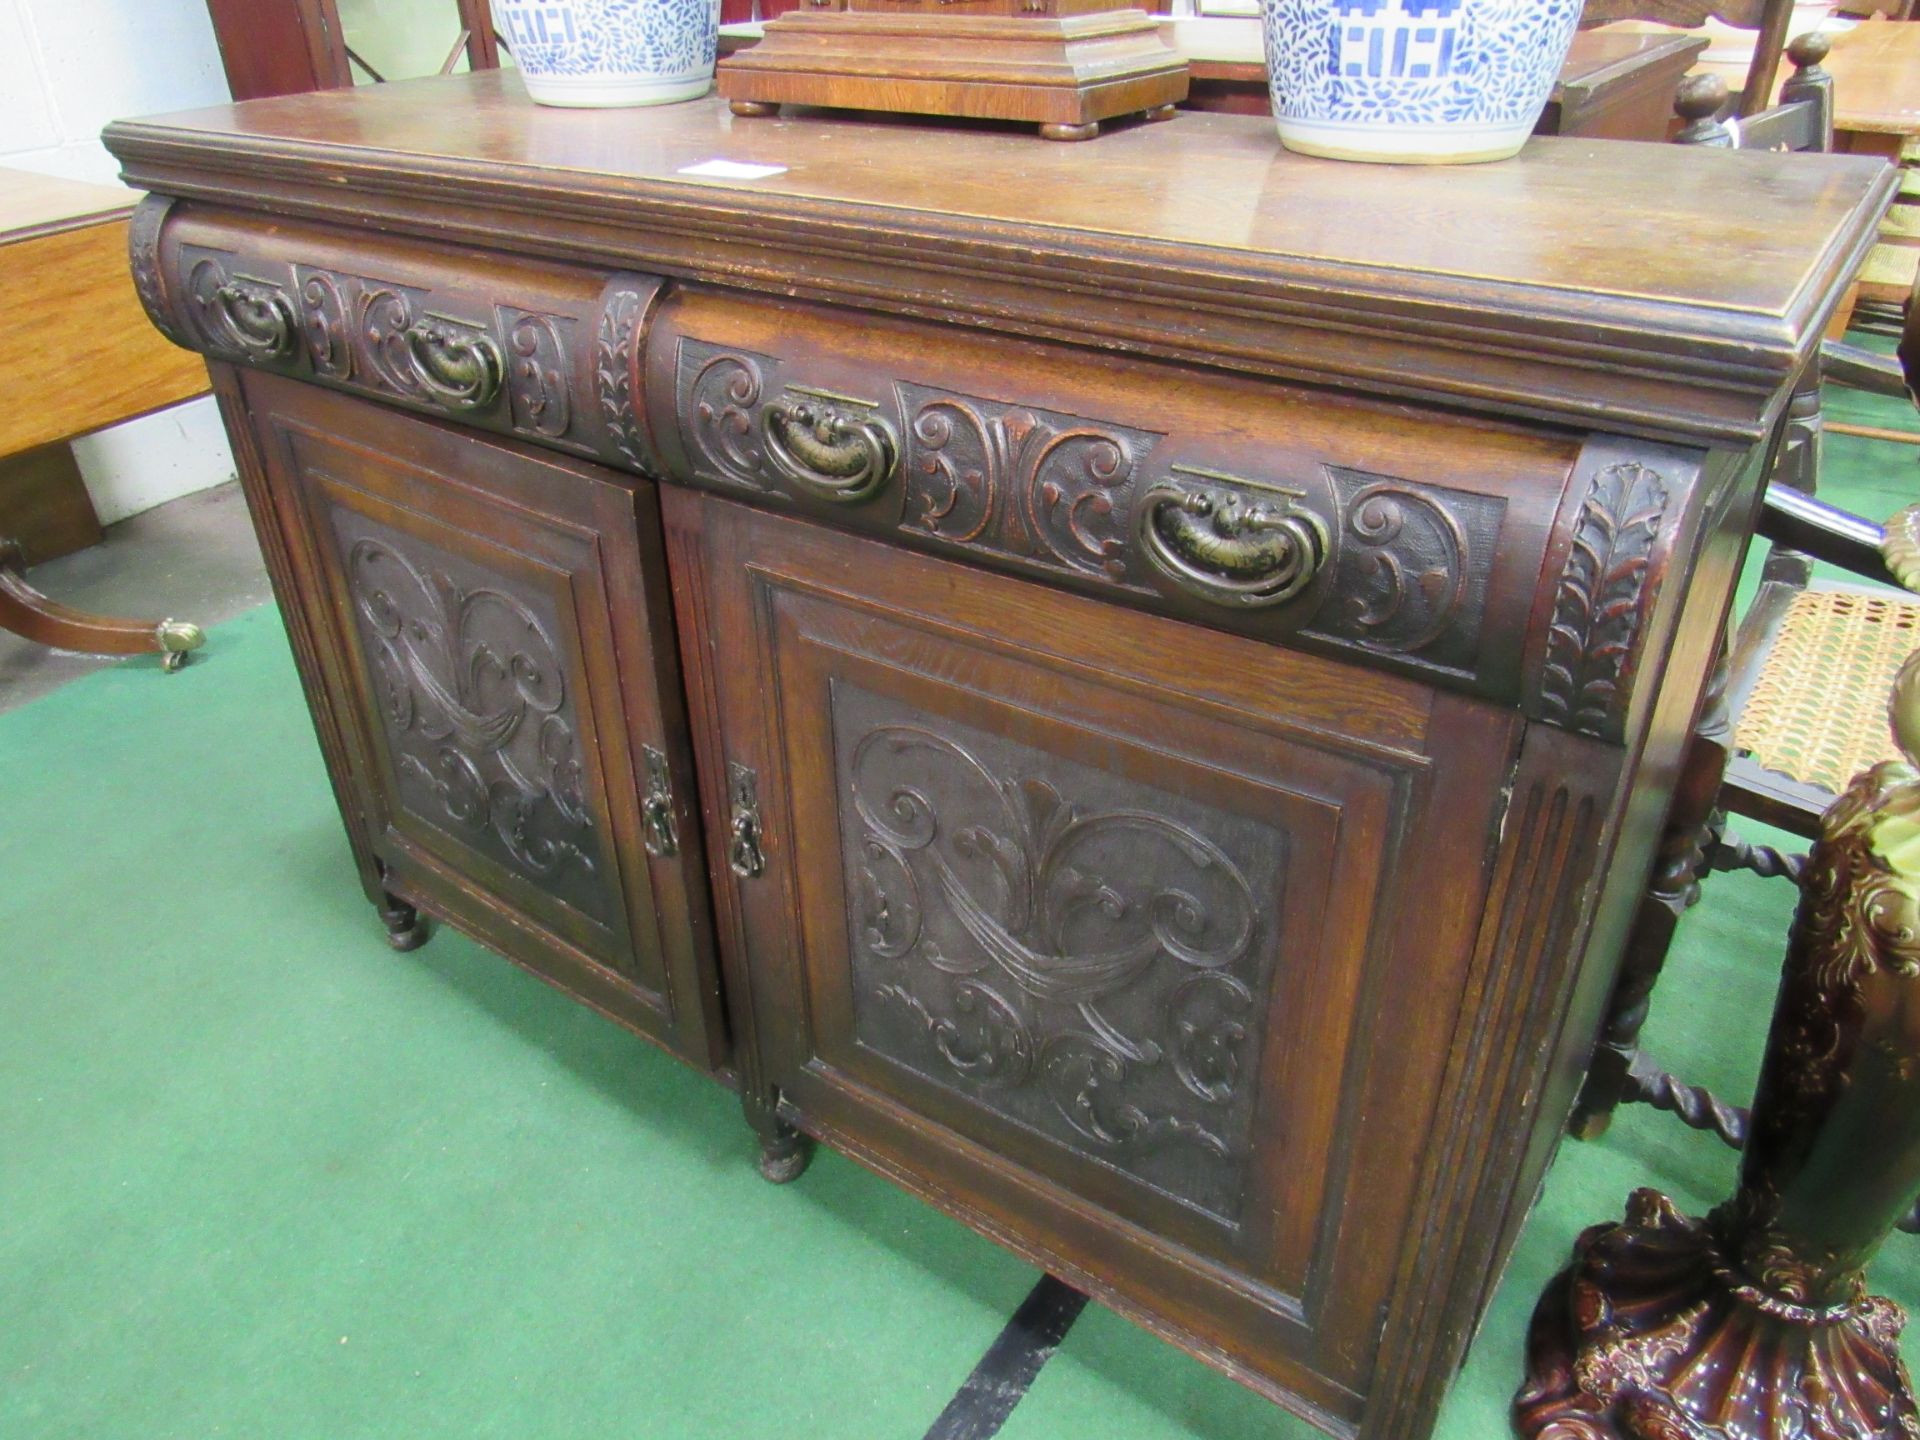 Oak sideboard with carved drawers and cupboard doors, 137 x 53 x 98cms. Estimate £10-20 - Image 4 of 5